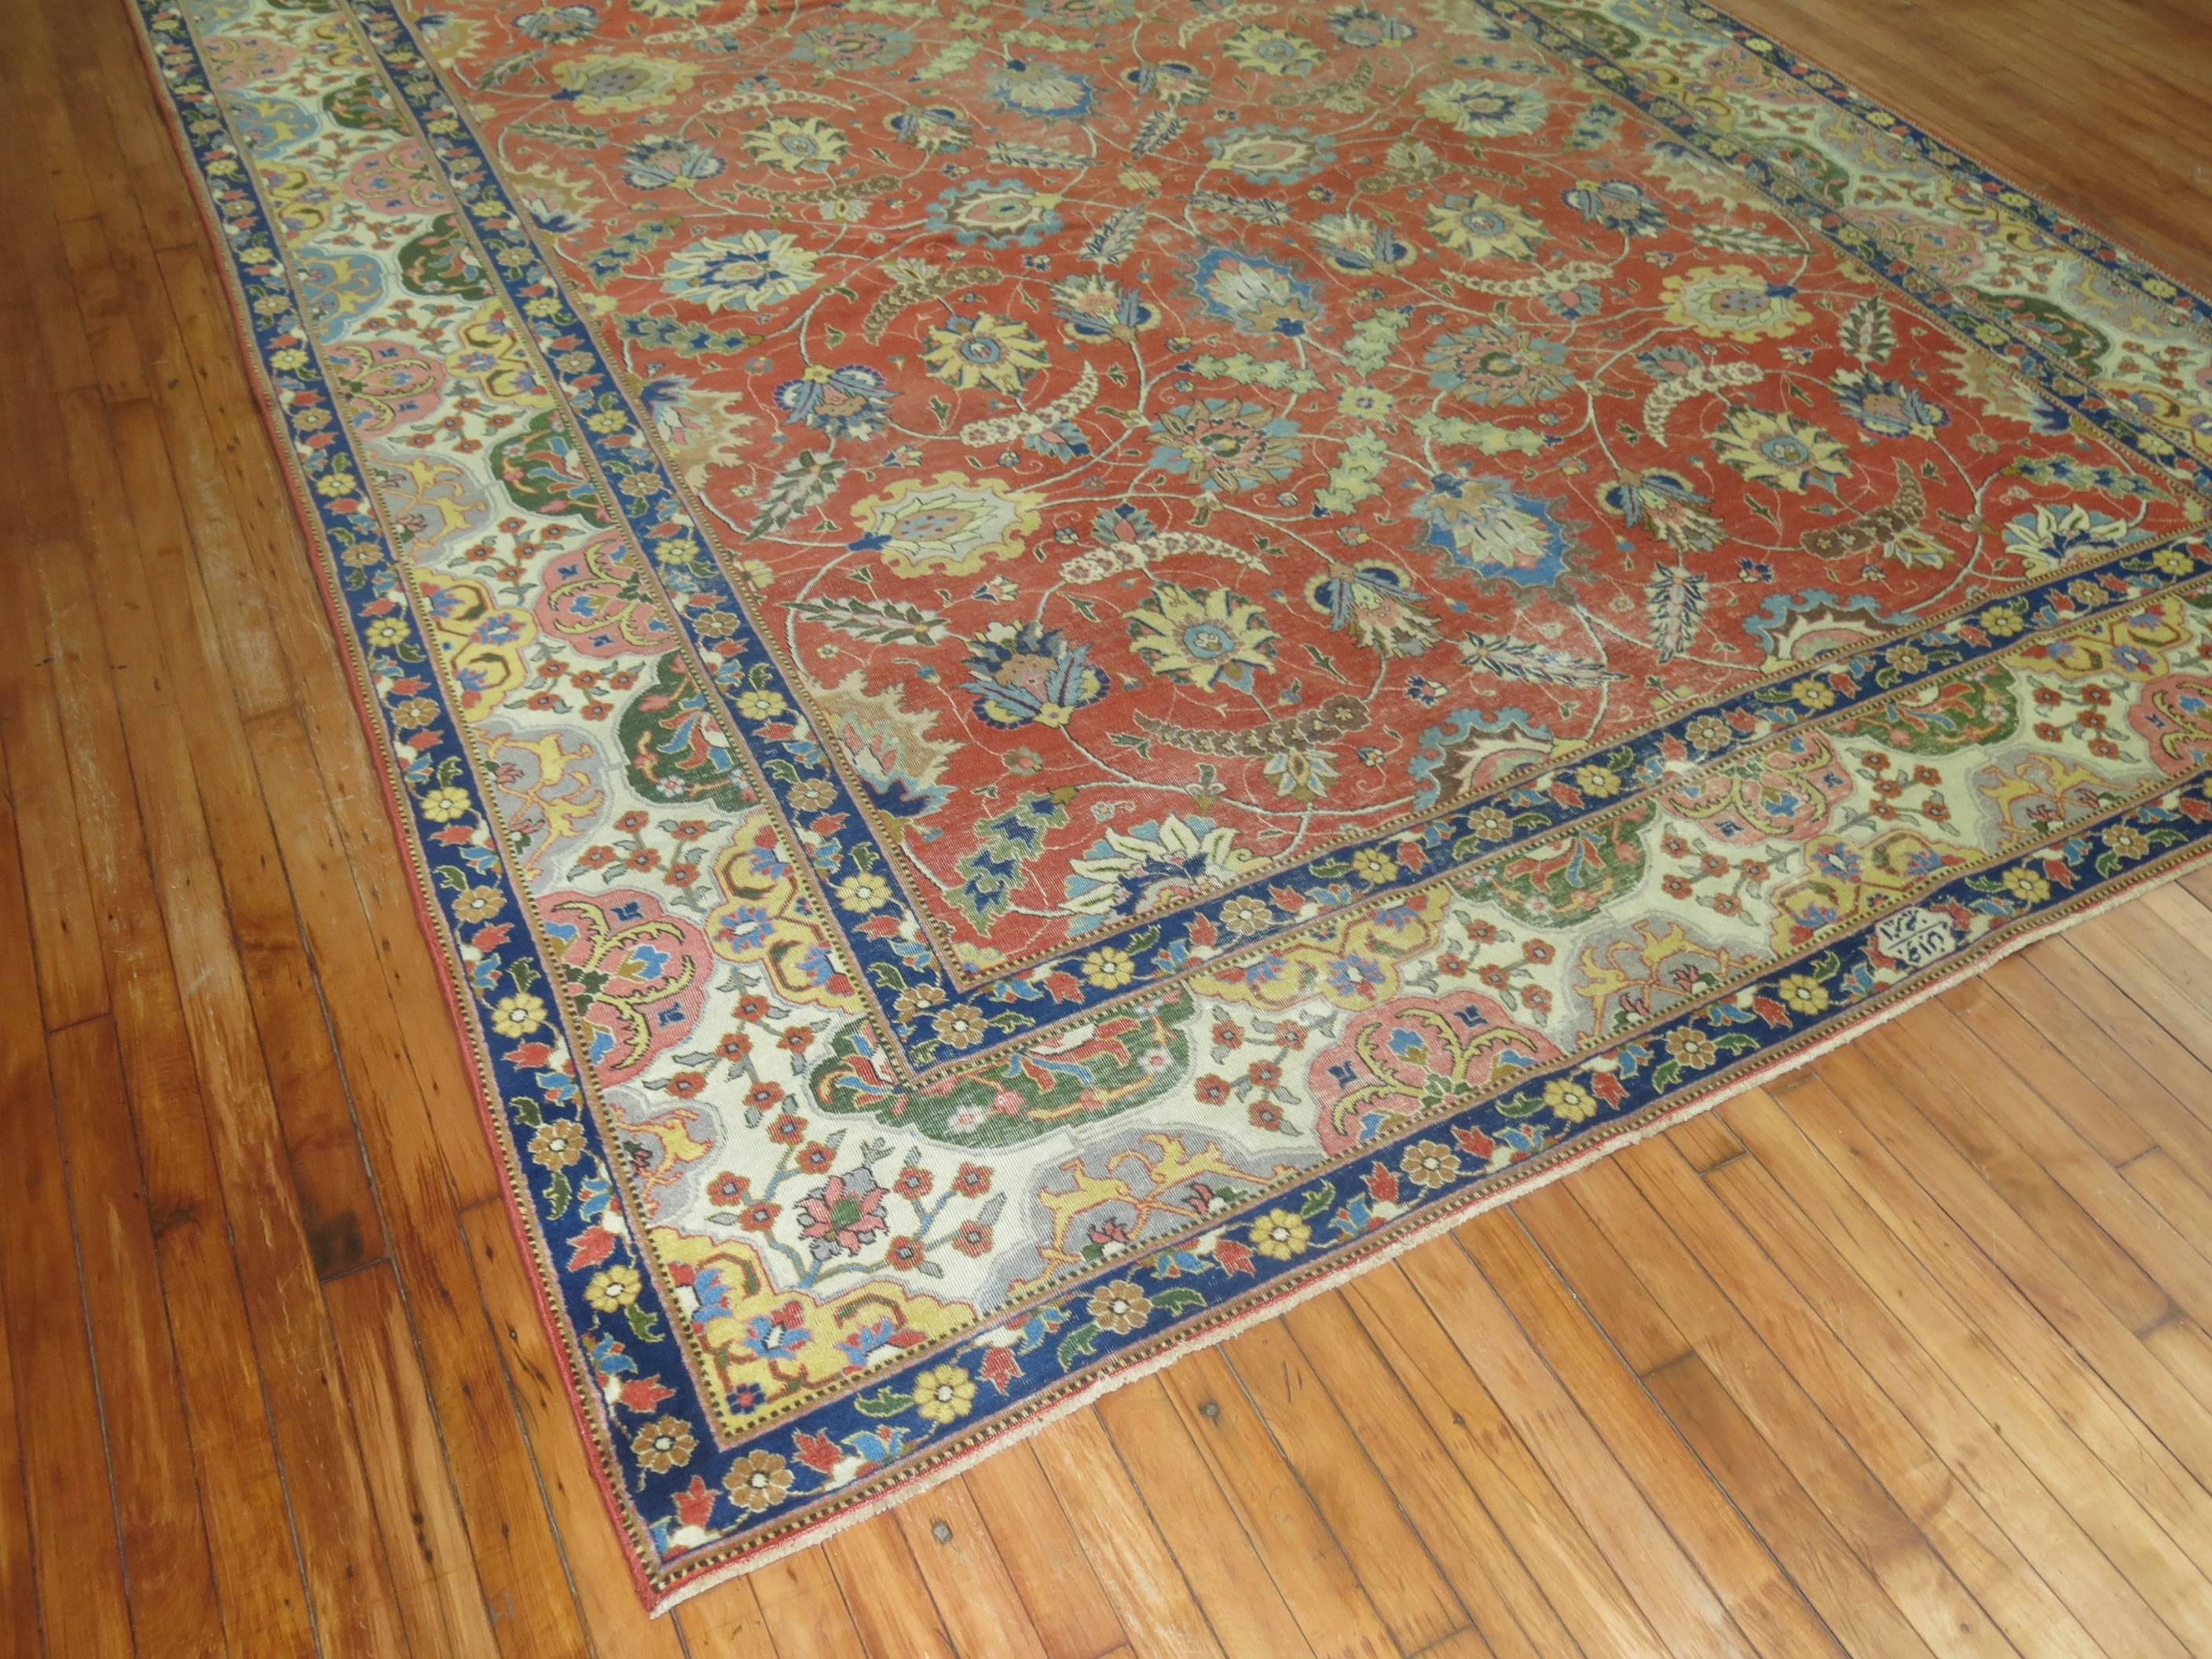 2nd quarter of the 20th century  room size Persian Tabriz rug.

8'10'' x 11'8''